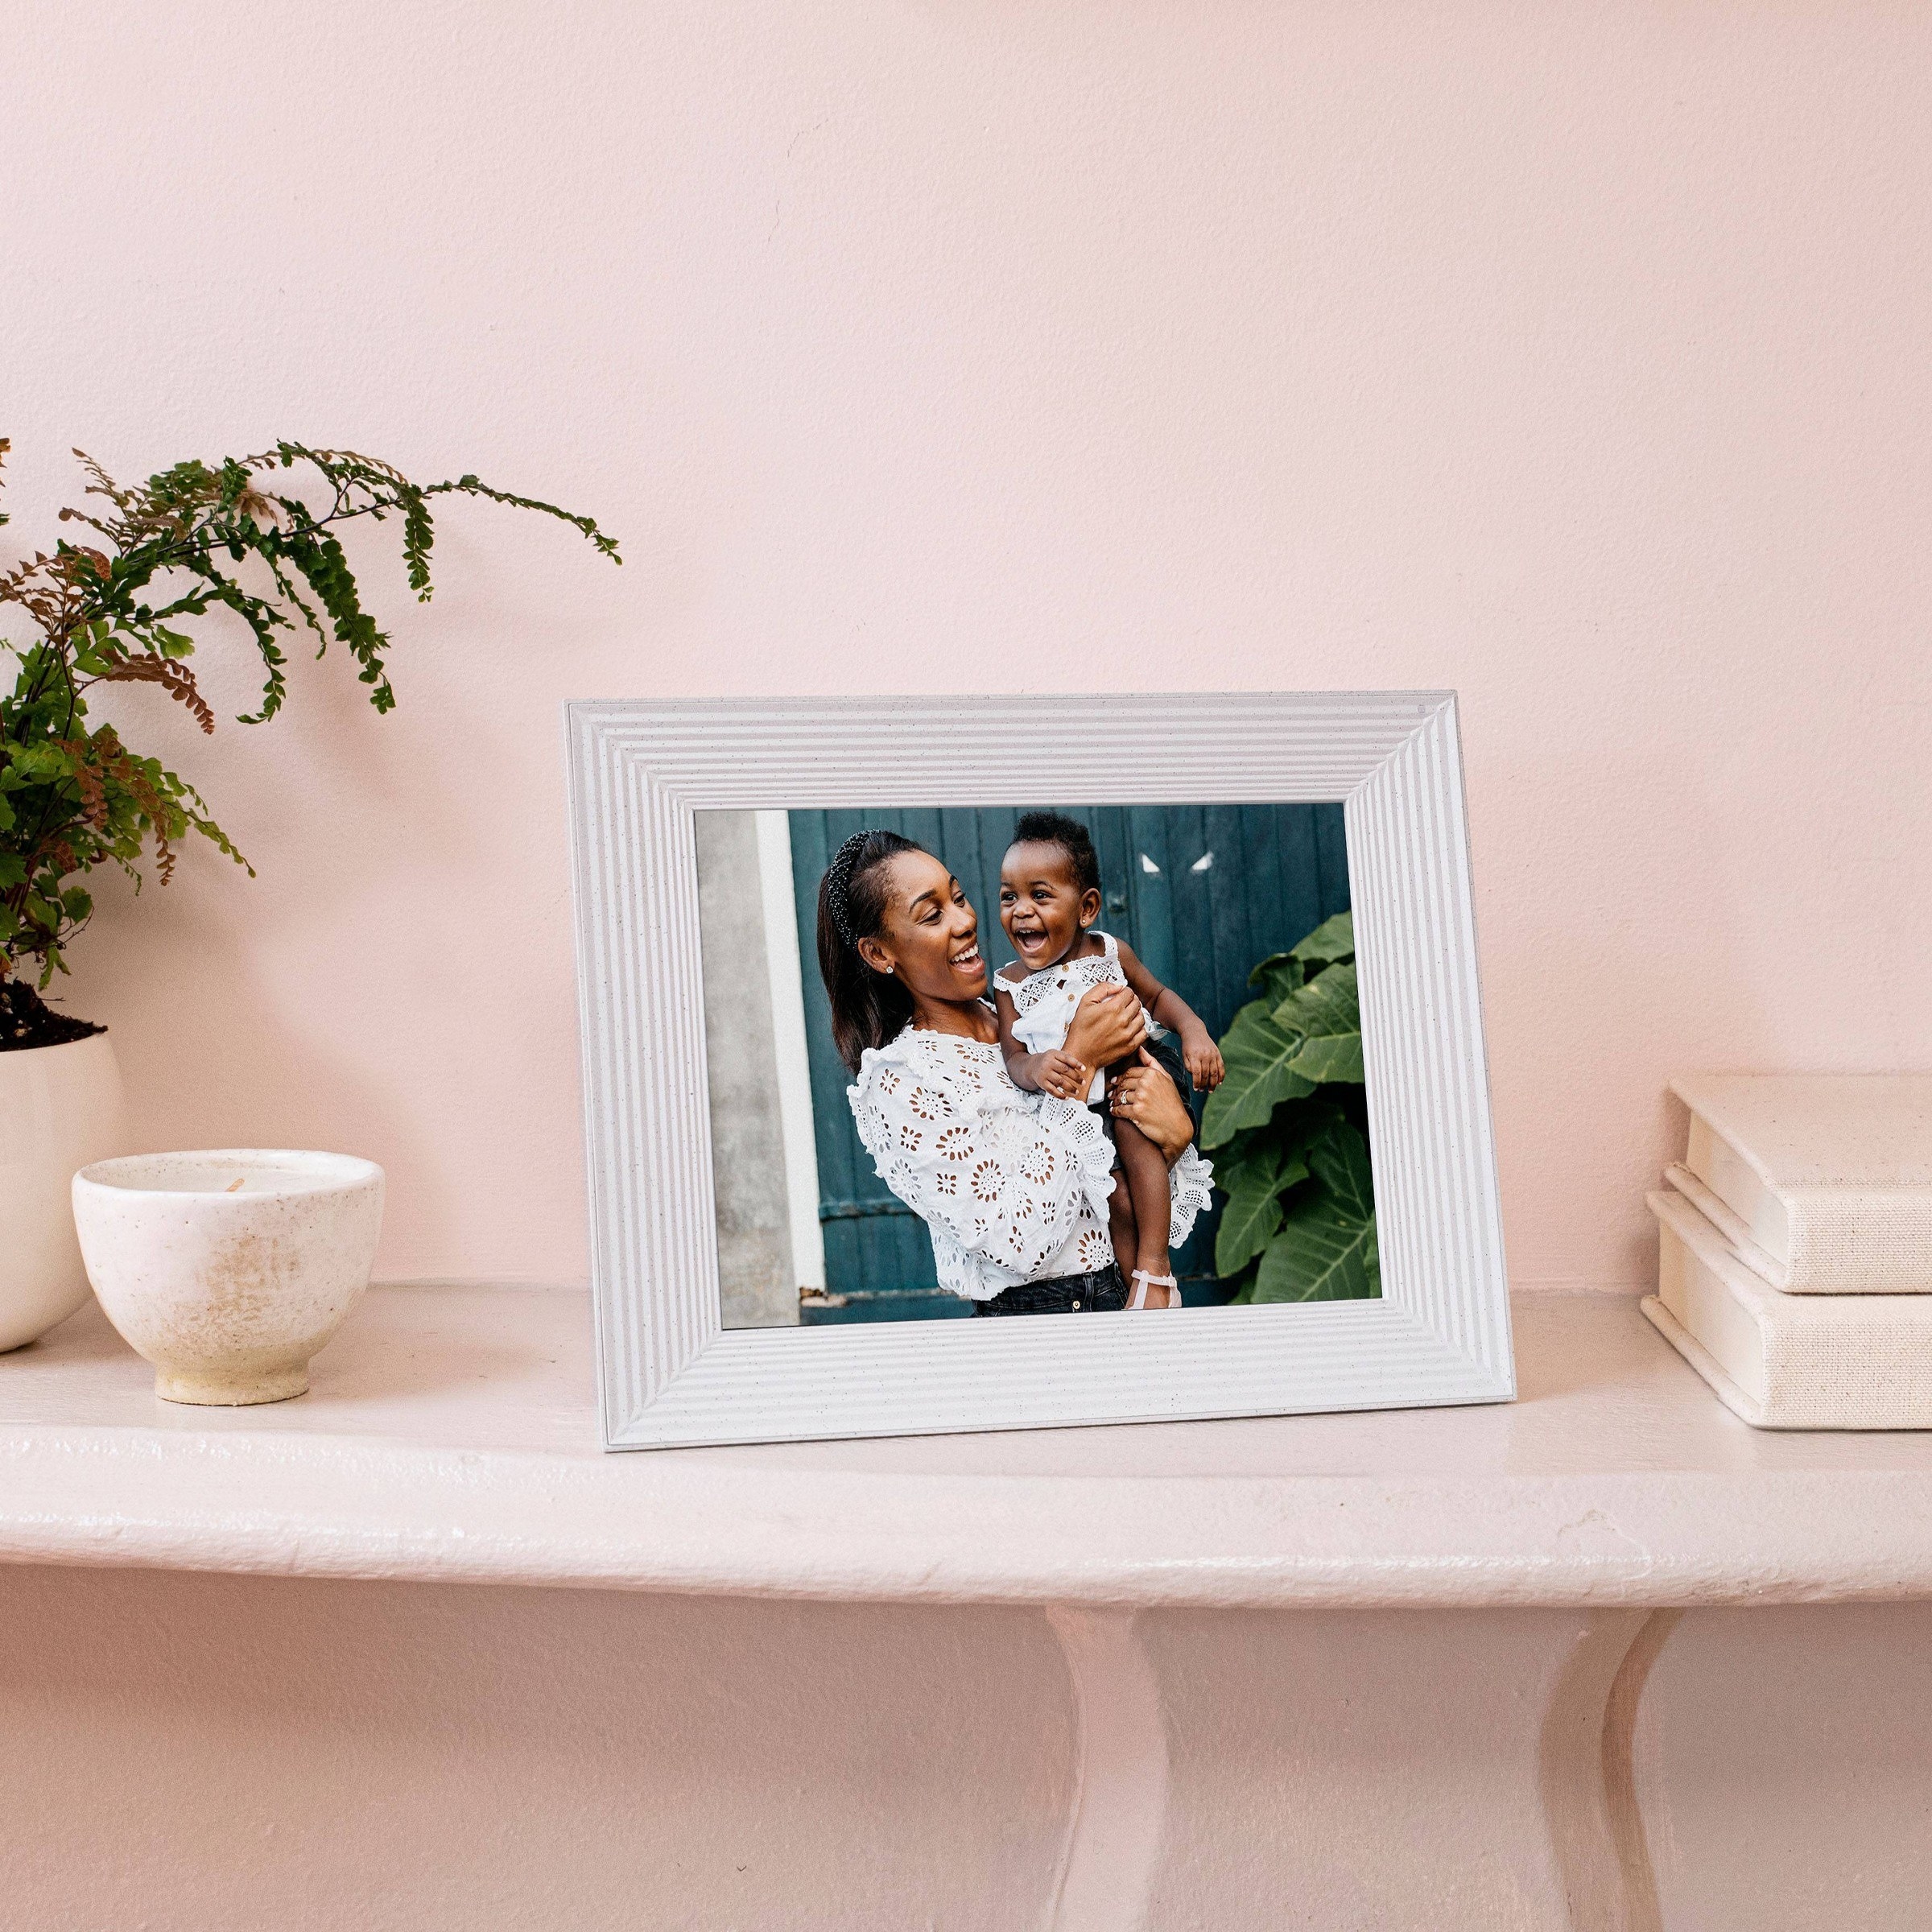 the frame in white showing a photo of a mother and toddler